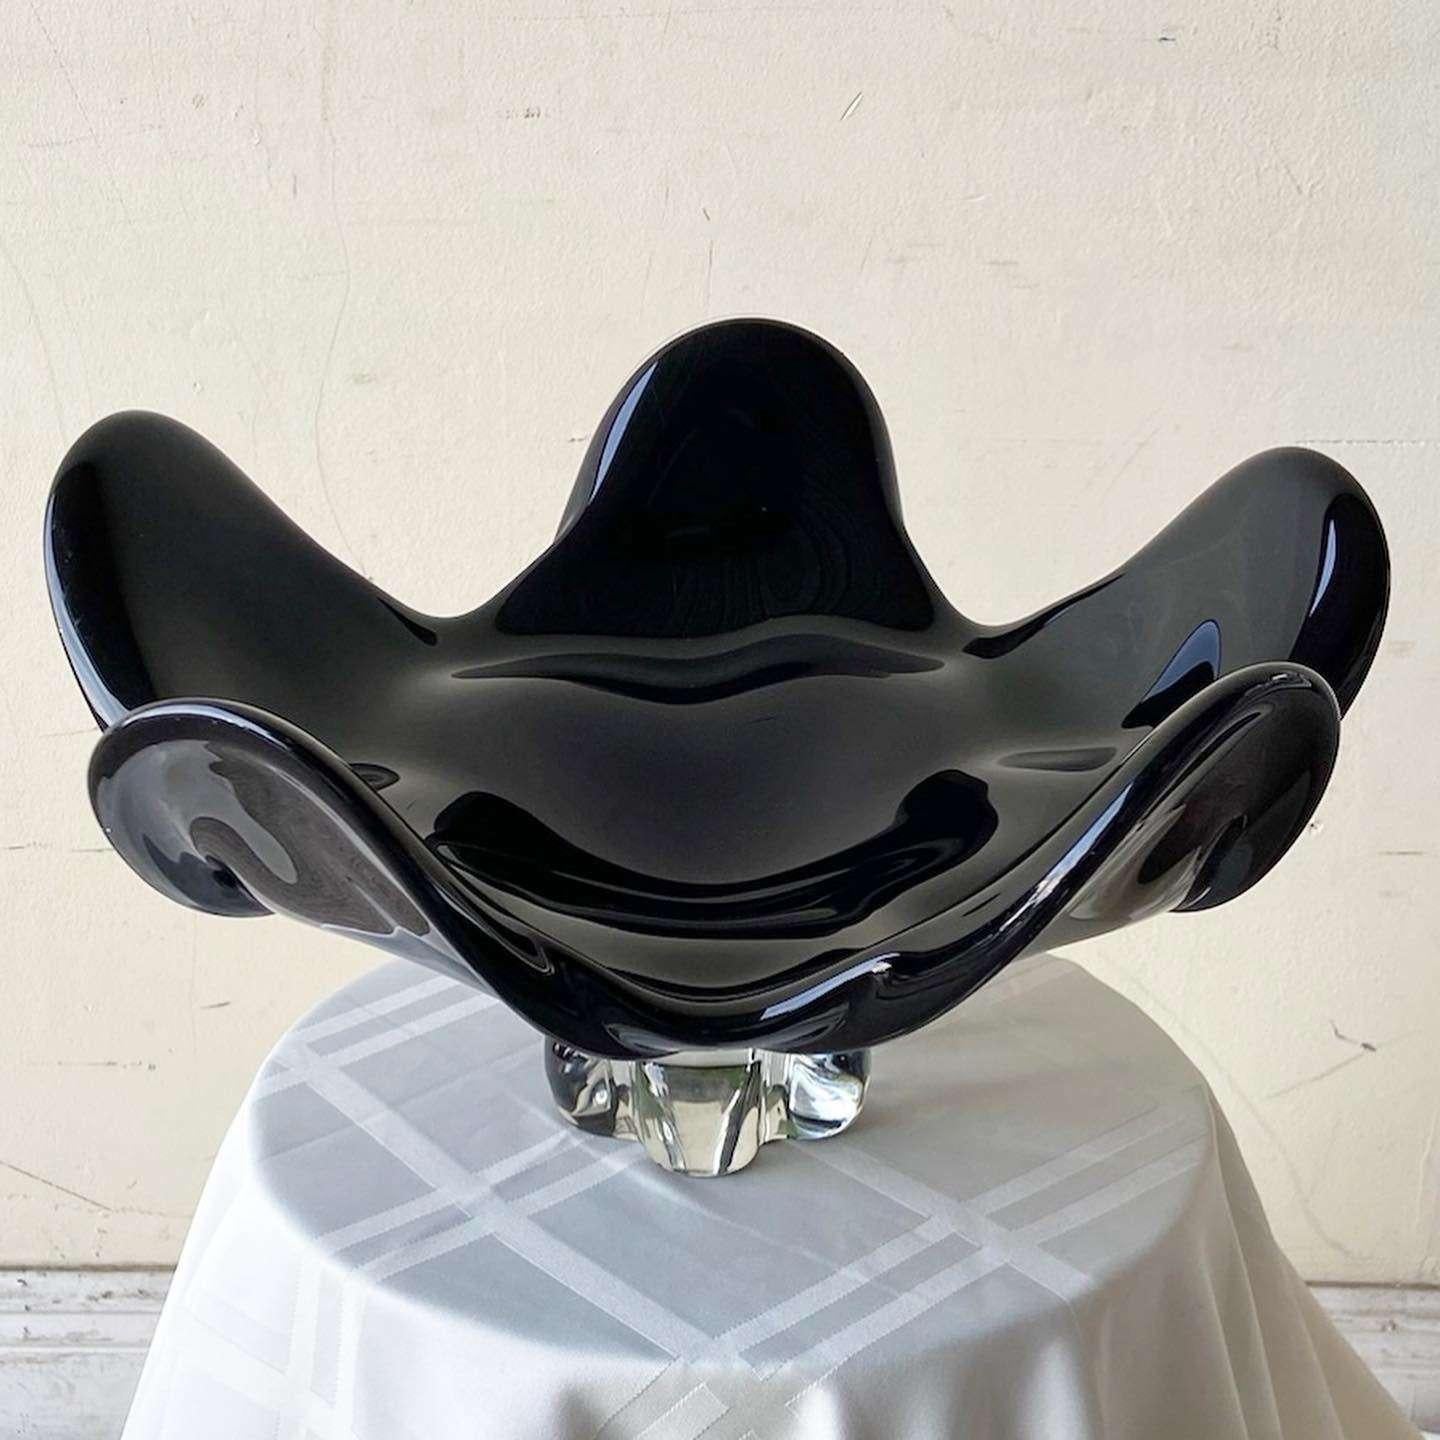 Incredible large sculptural Italian Murano glass bowl by Seguso for Oggetti. Features a black amethyst glass with a clear base in the shape of an open flower.
